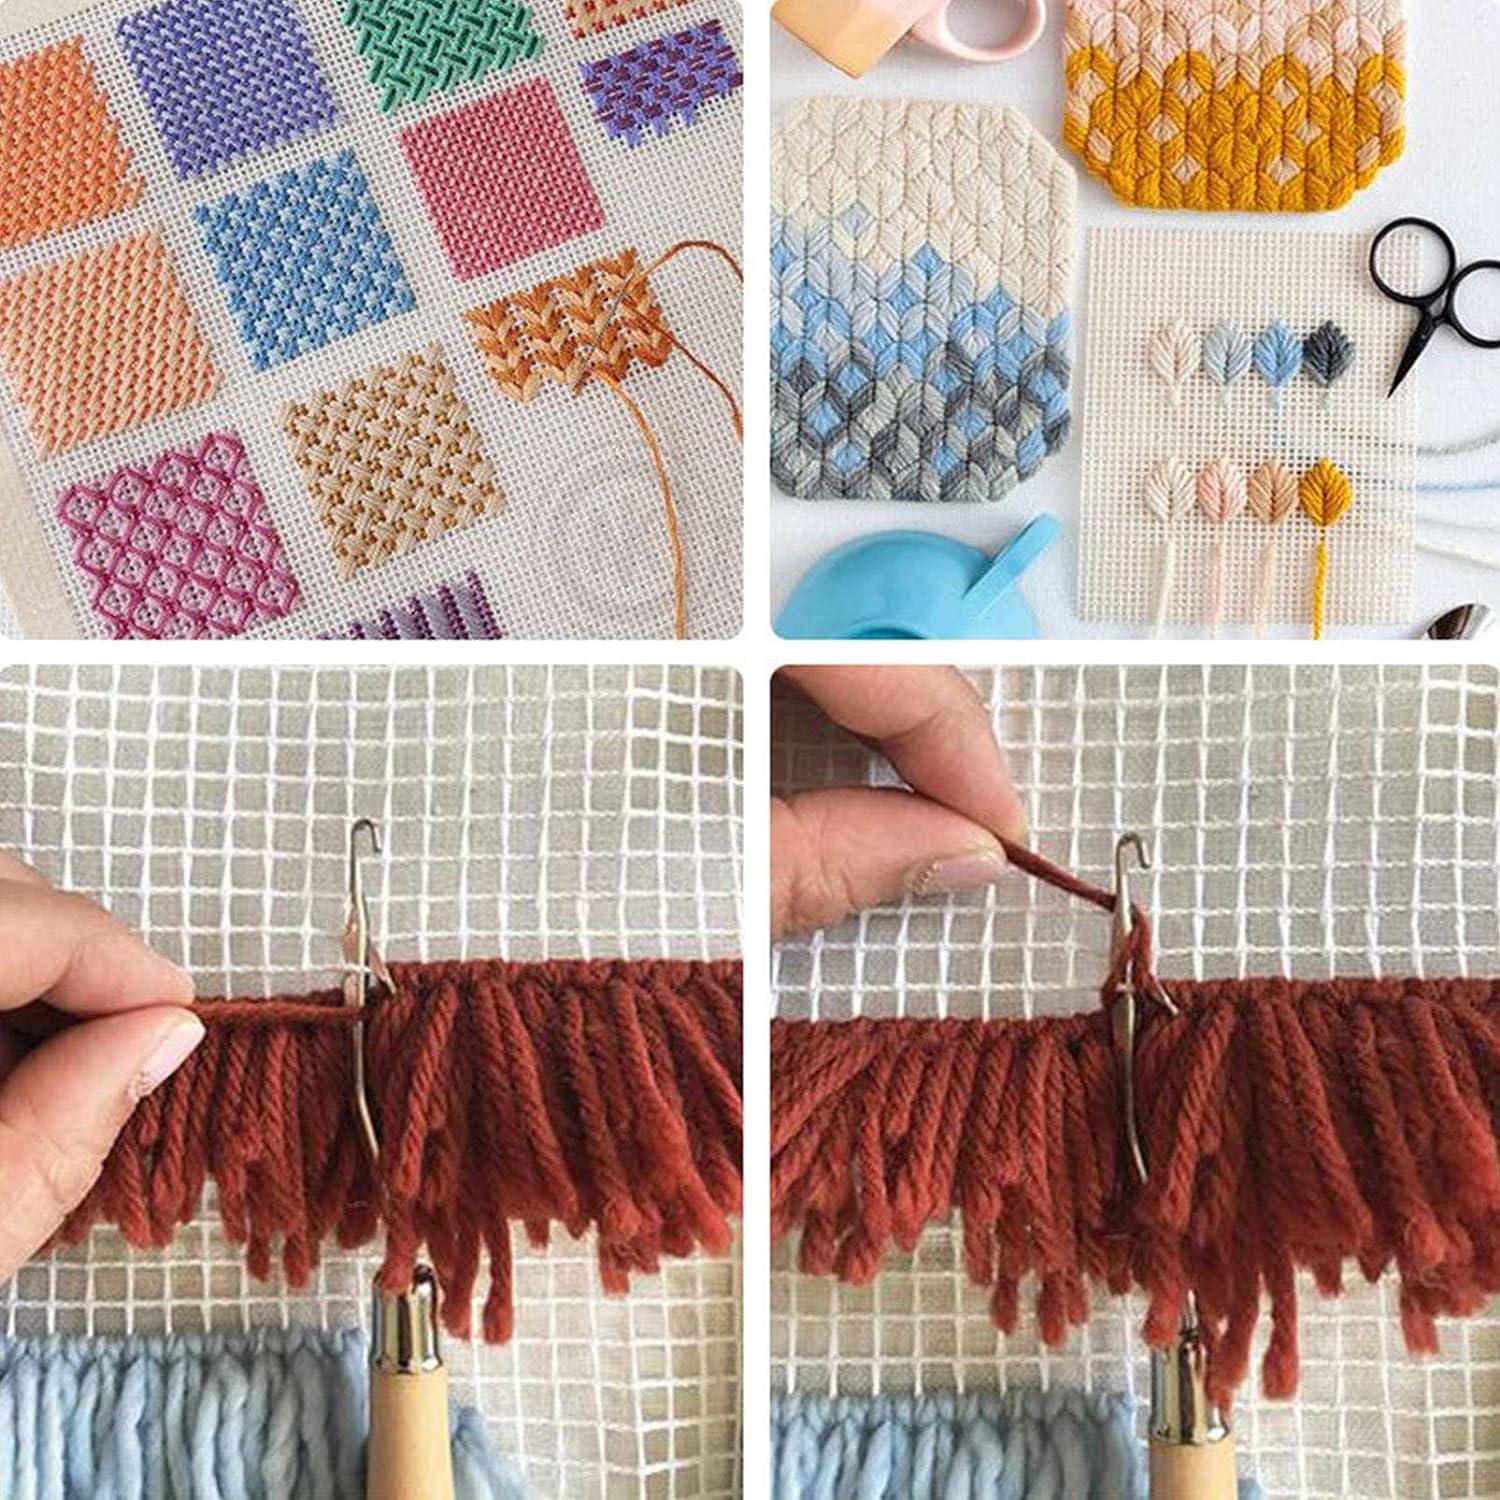  39.4 x 62 Inch Blank Rug Hooking Mesh Canvas Kit with Wooden  Bent Latch Hook Tool for Latch Hook Rug Tapestry Canvas for Kids Adults